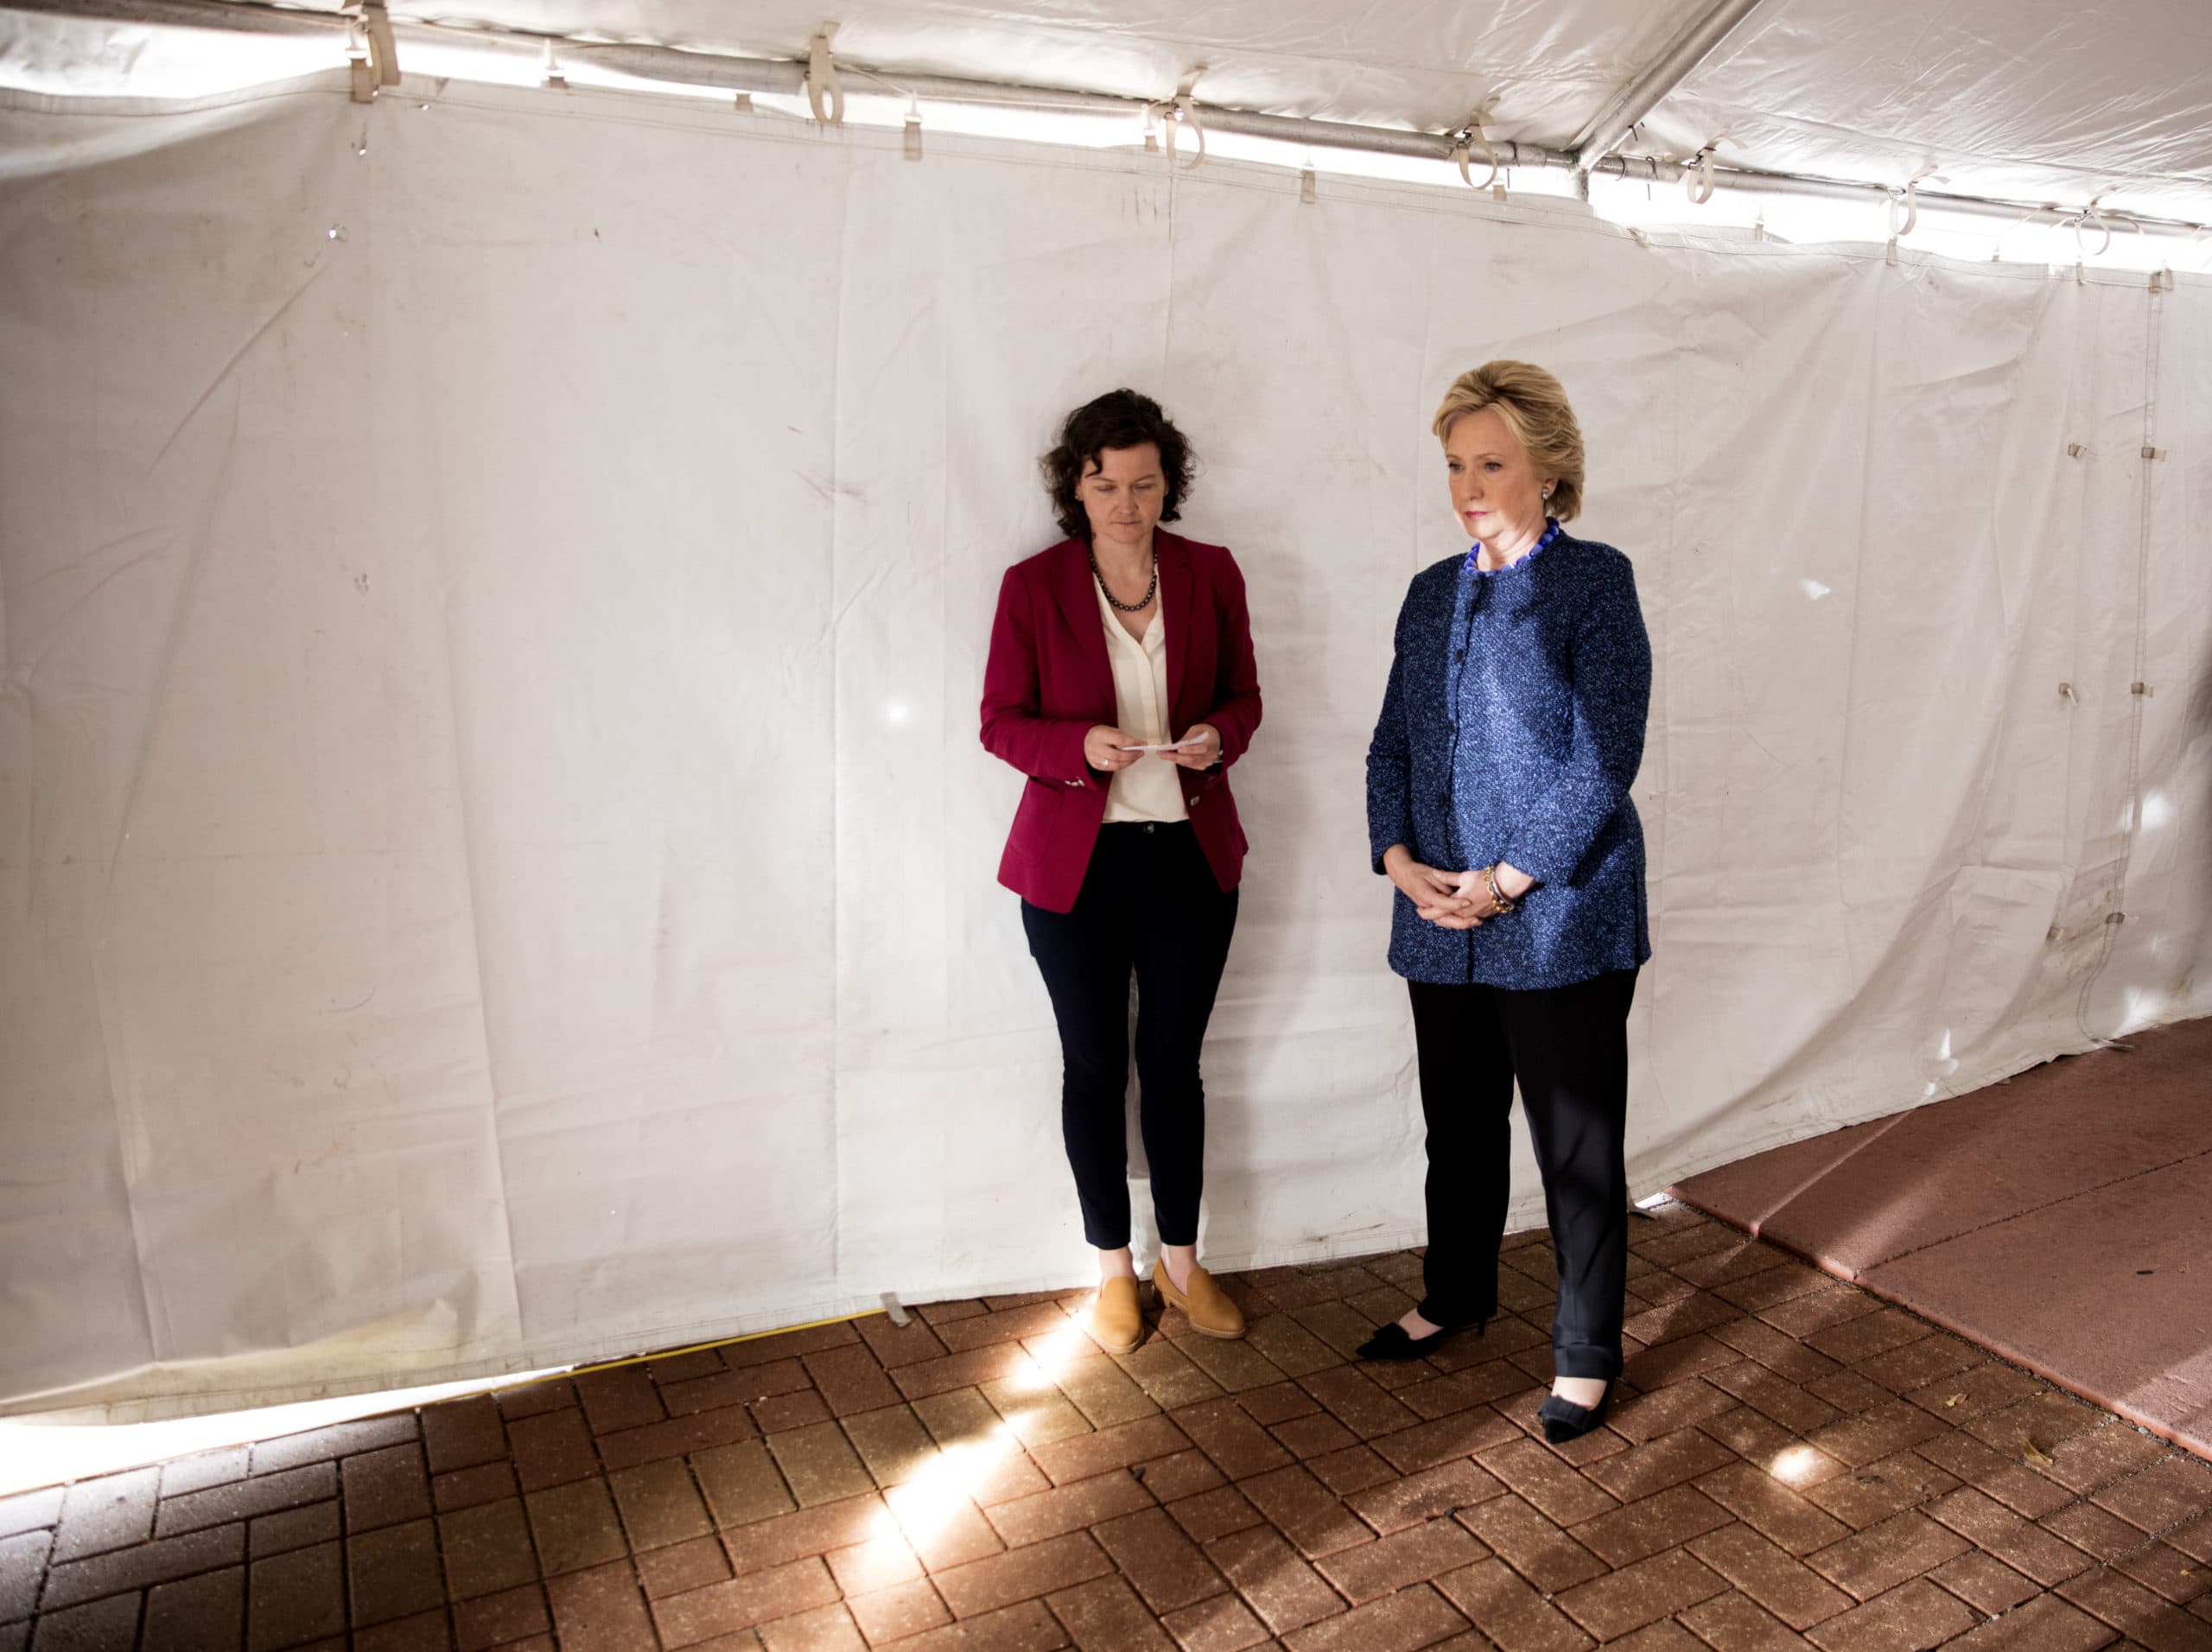 Clinton waits backstage in Cedar Rapids before her rally after hearing about the FBI reopening her email investigation, Oct. 28, 2016